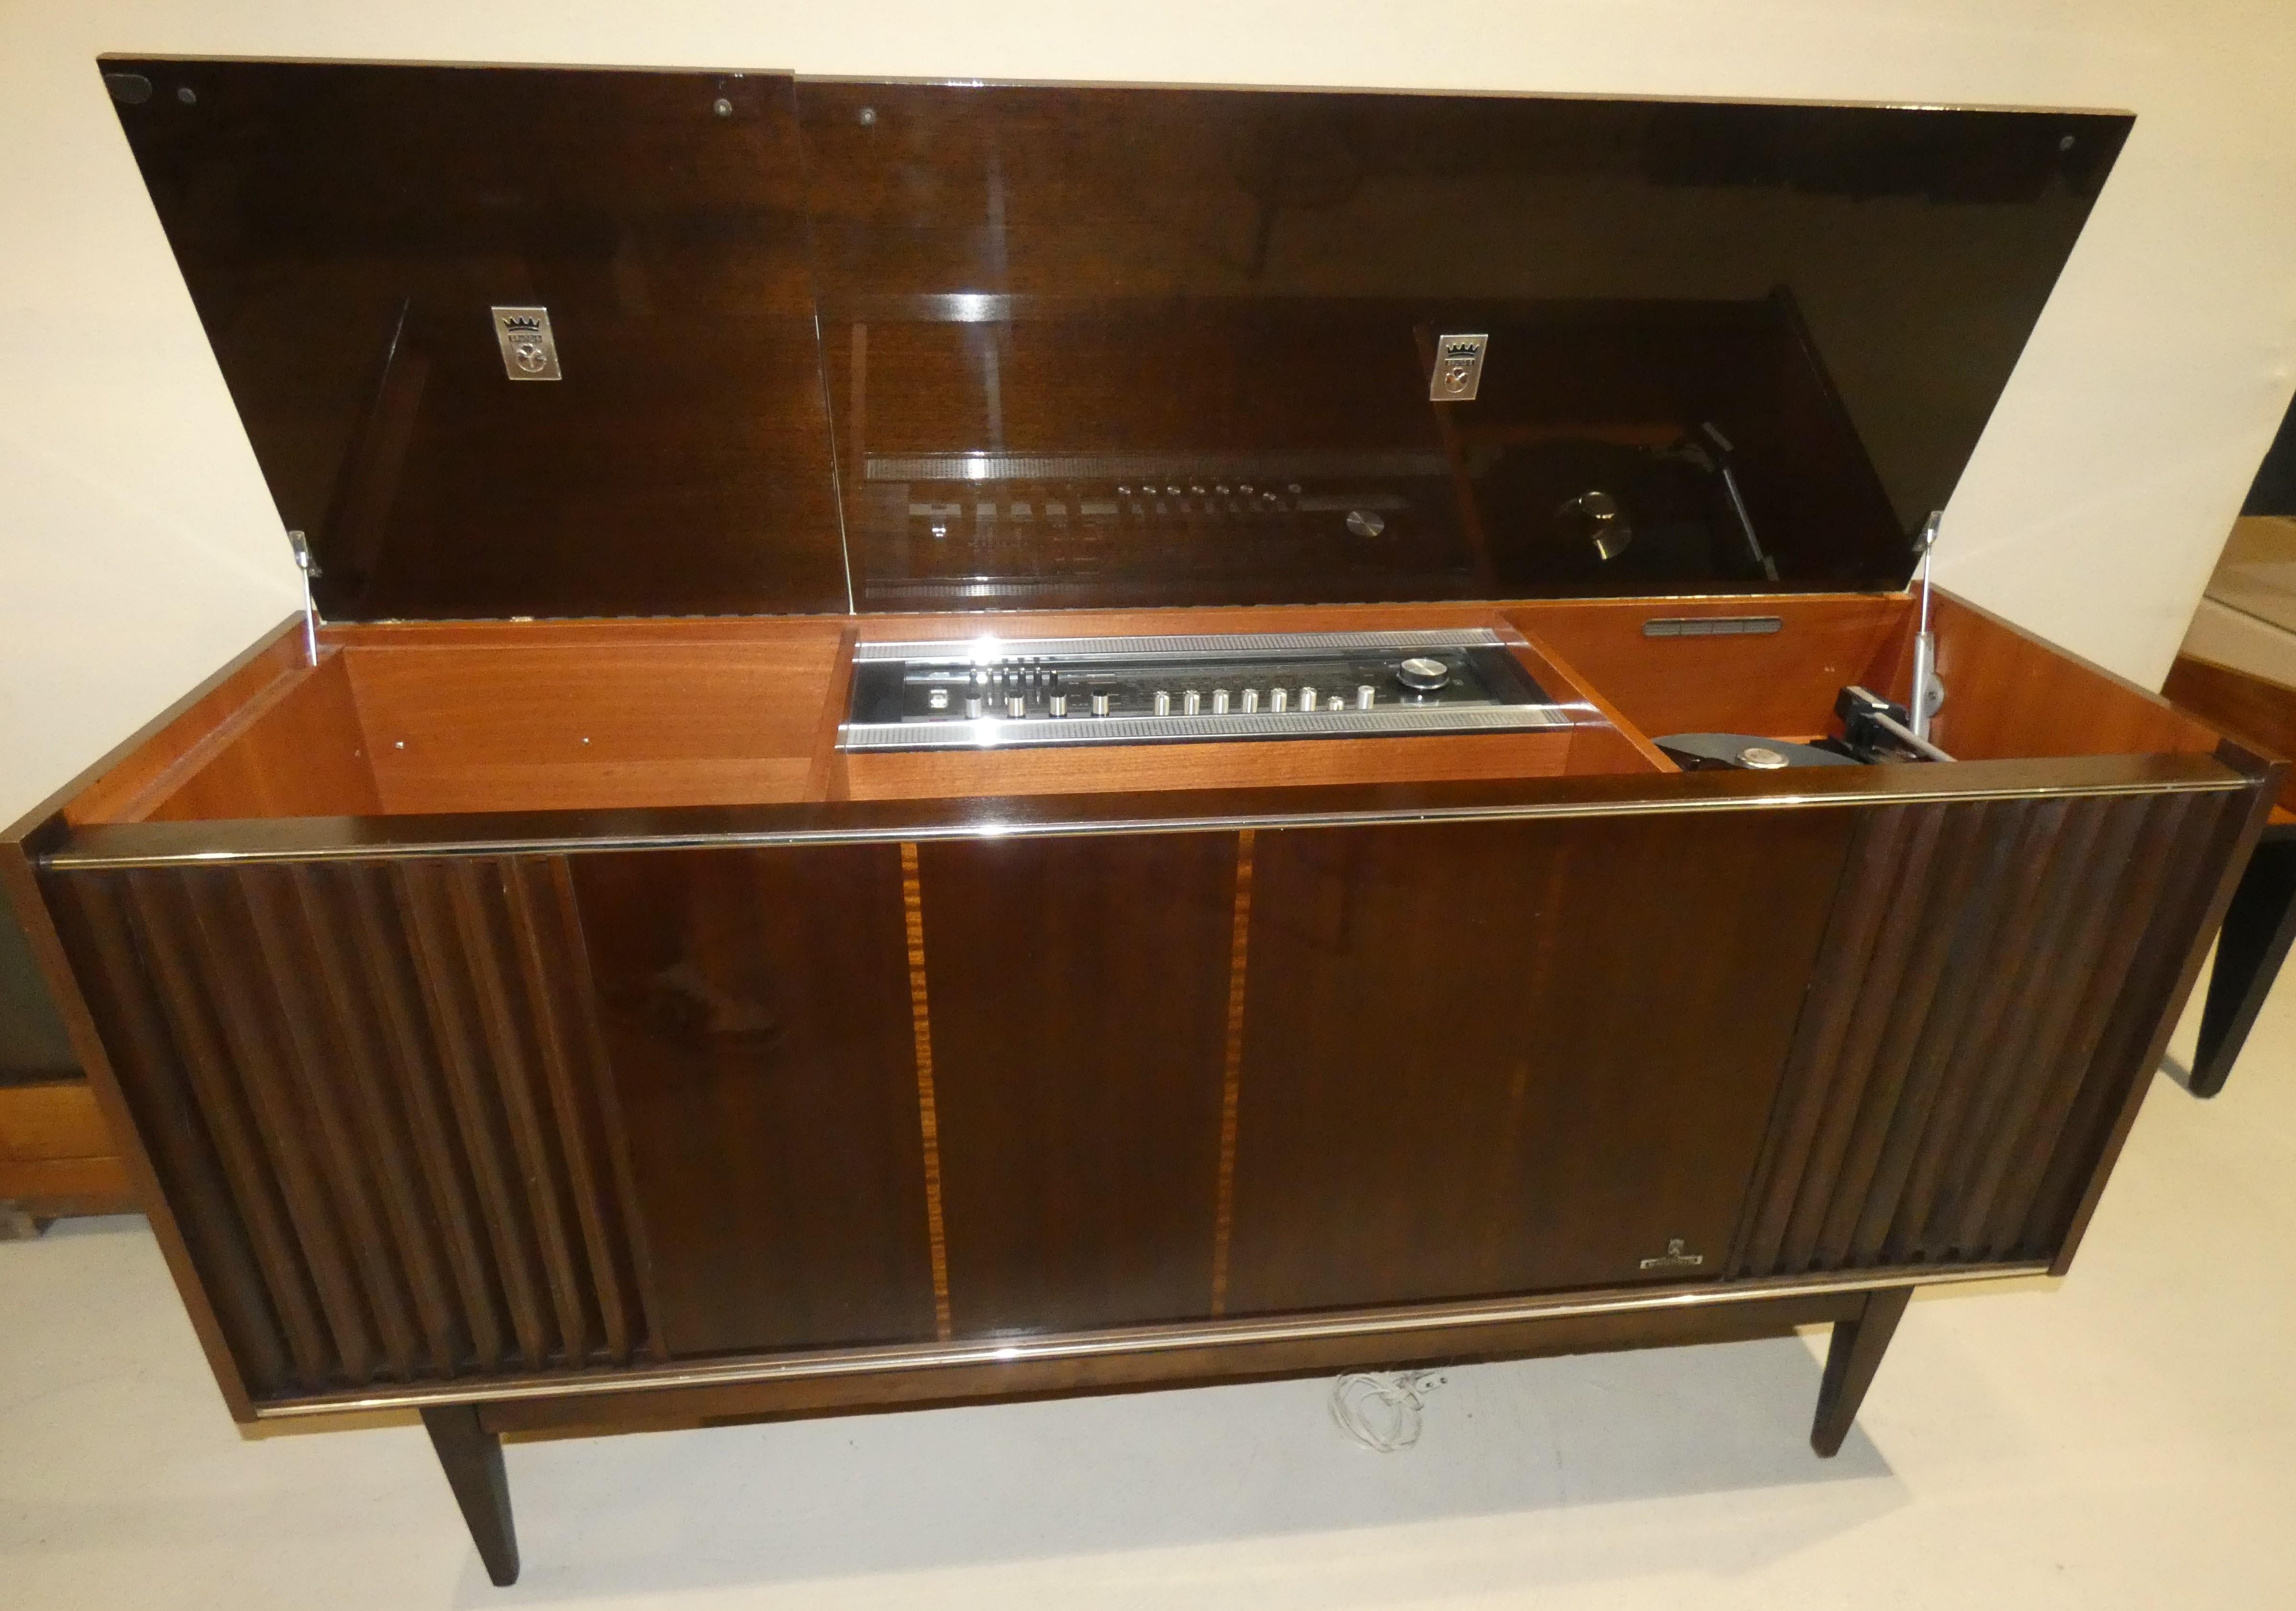 Model: Rossini 2 Alltransistor - Grundig Radio-Vertrieb, RVF
Producer/Brand: Grundig (Radio-Vertrieb, RVF, Radiowerke)

Country: Germany
Year: 1968/1969

Scandinavian design for this stereo cabinet manufactured by Grungig in Germany in 1968.
The